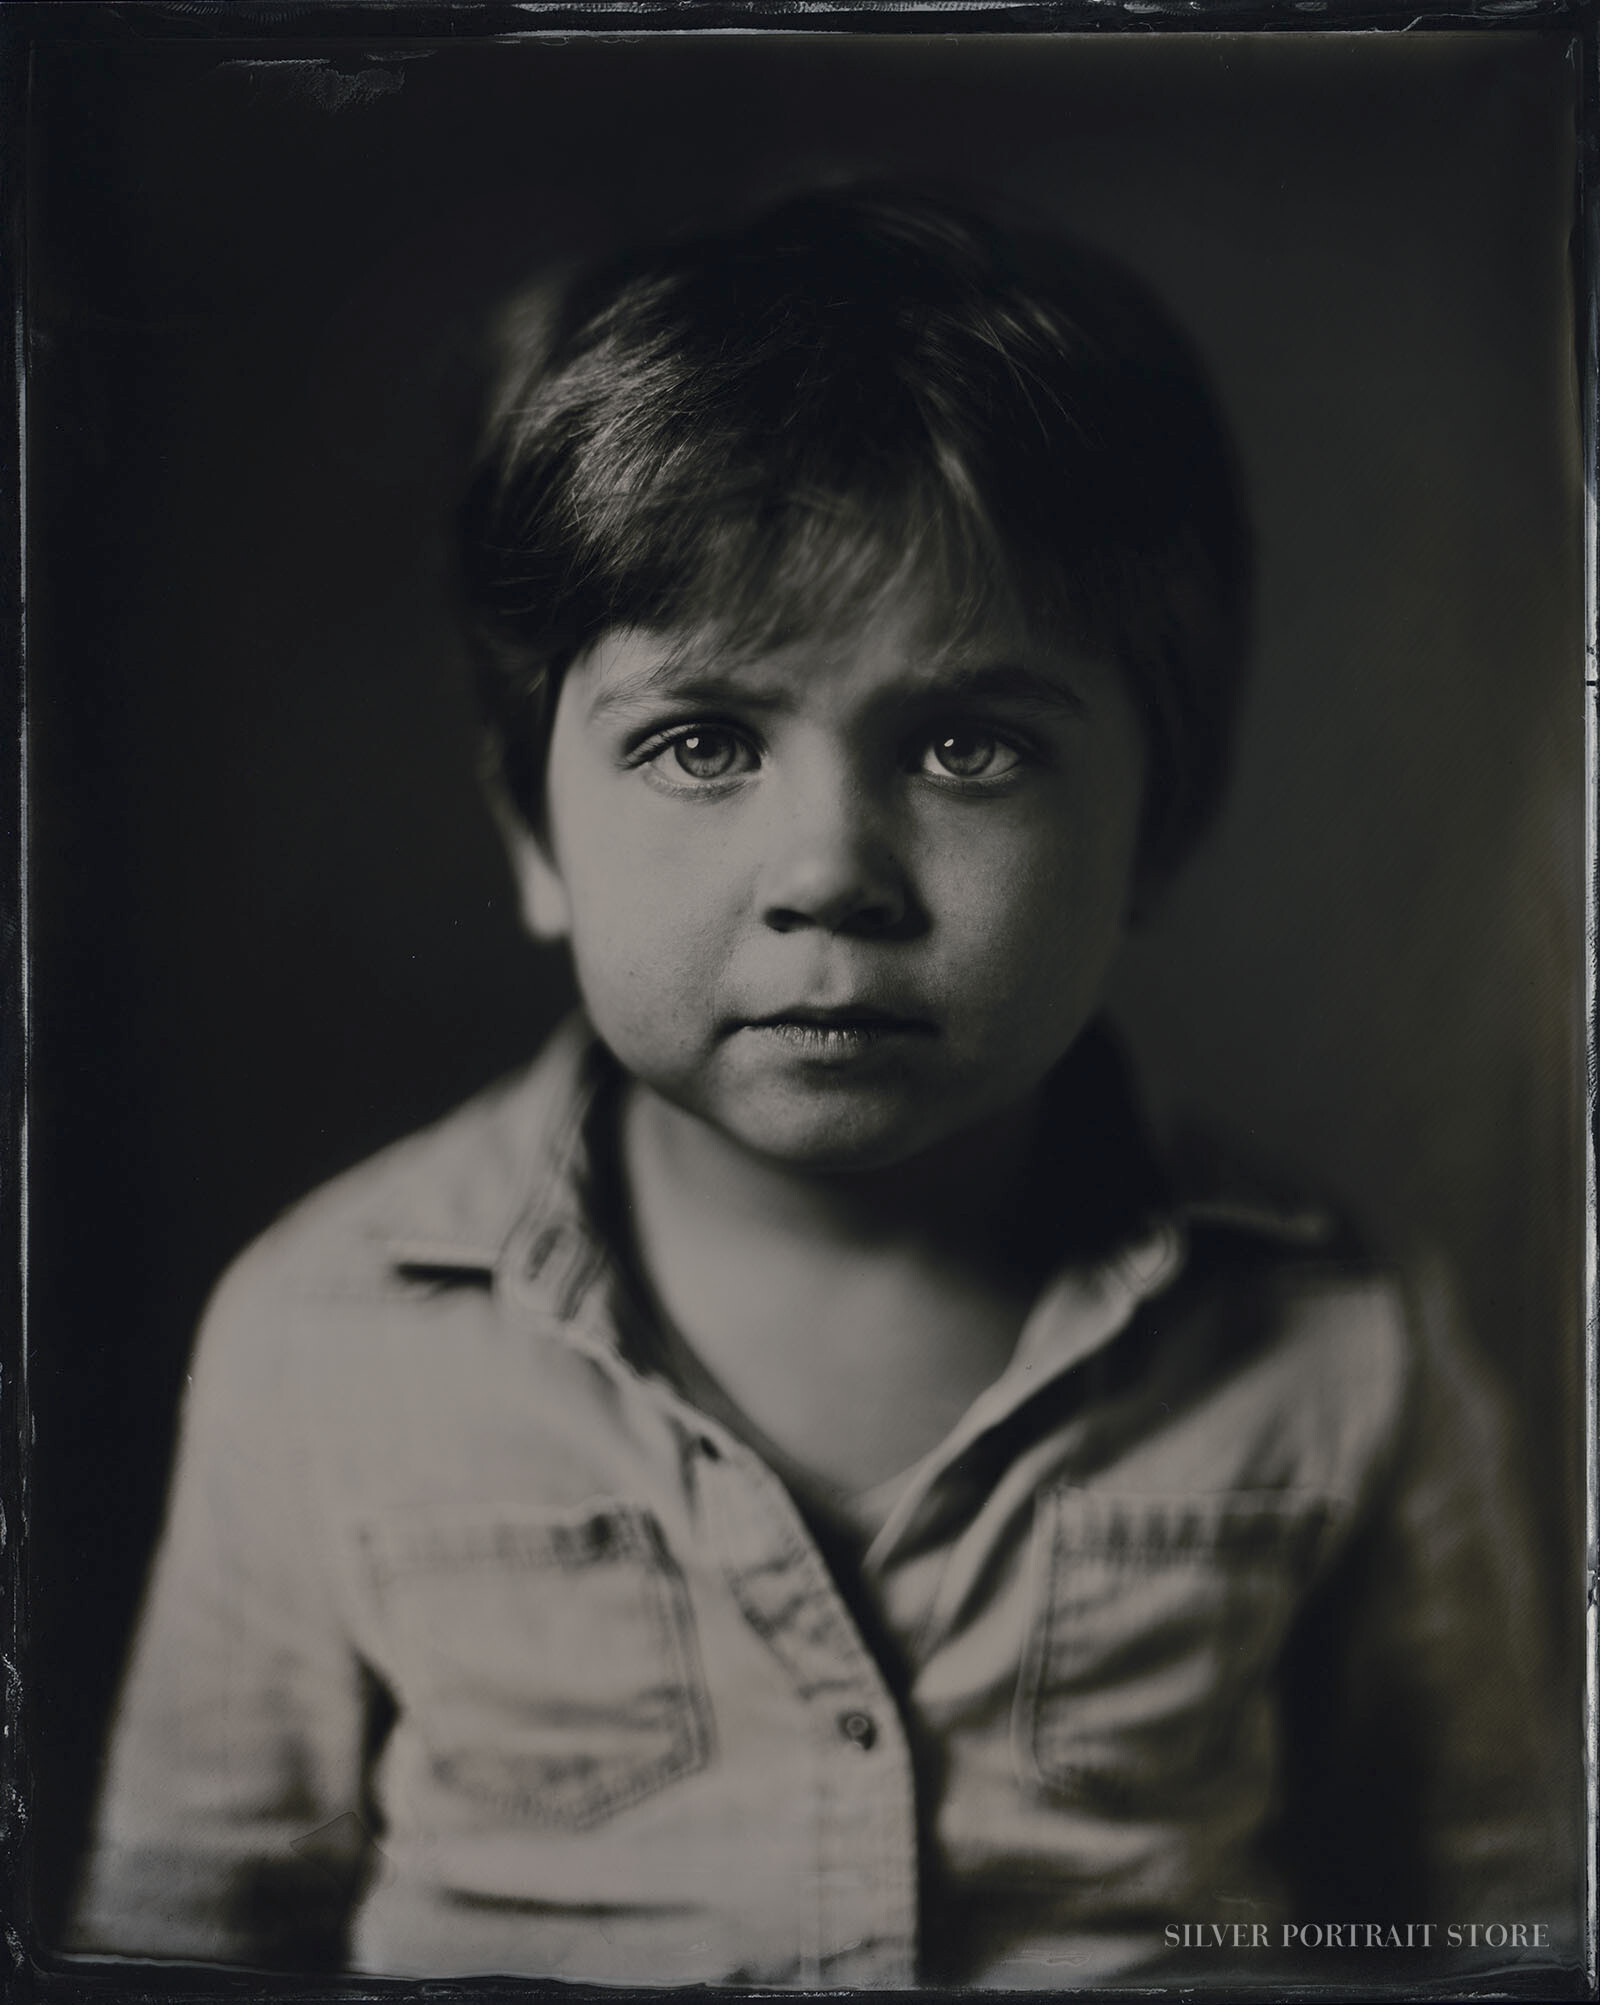 Mees-Silver Portrait Store-Scan from Wet plate collodion-Tintype 20 x 25 cm.